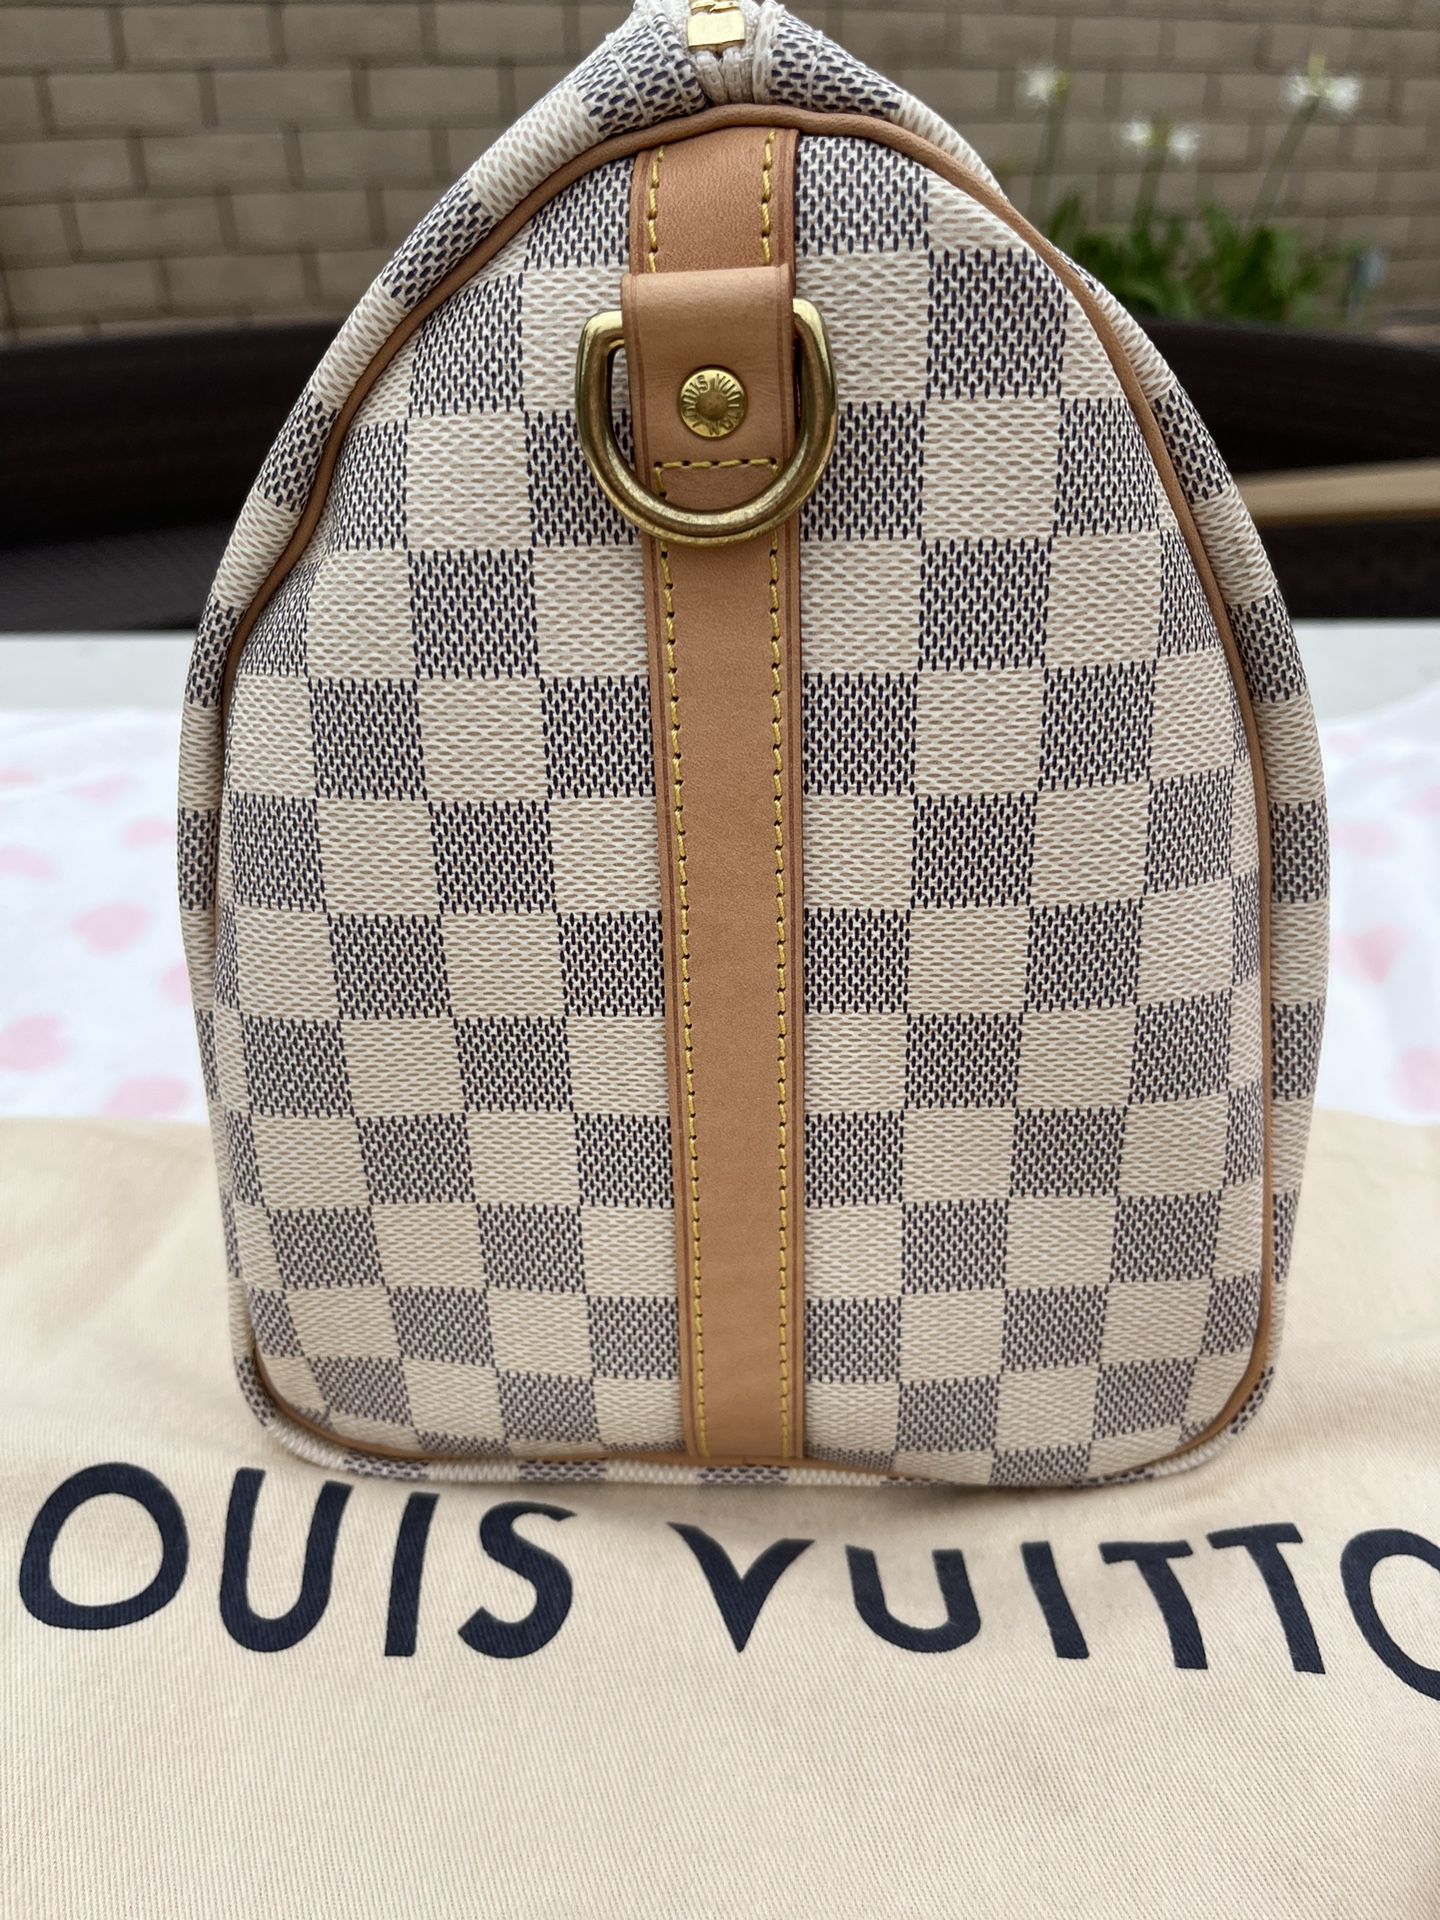 Auth LV Rosalie Coin Purse Damier Azur for Sale in Vallejo, CA - OfferUp